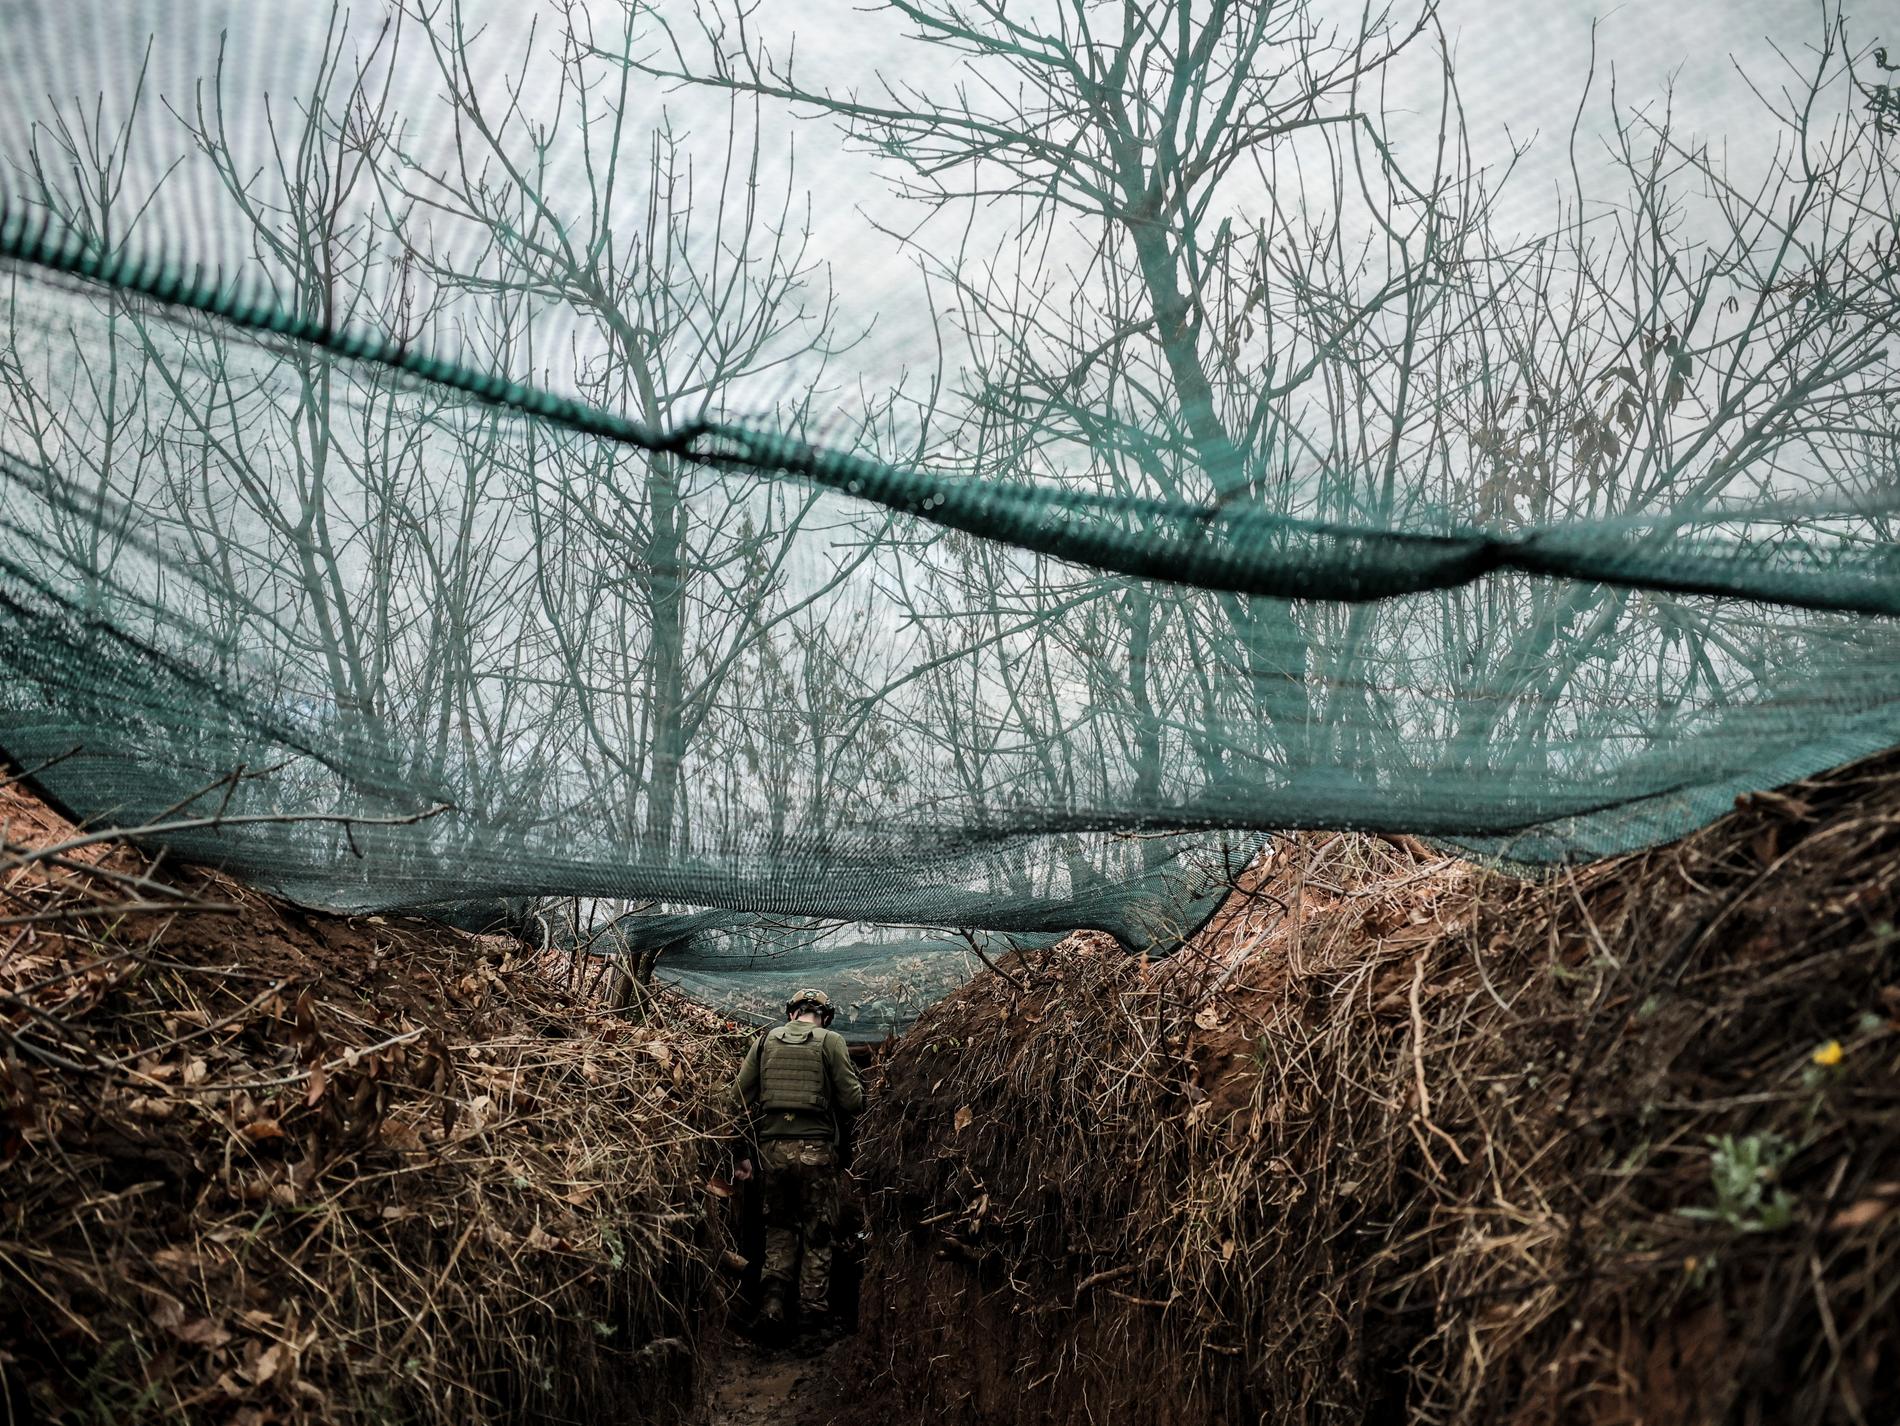 With the help of tear gas, Ukrainian soldiers are said to have been pushed out of their hiding places in the trenches.